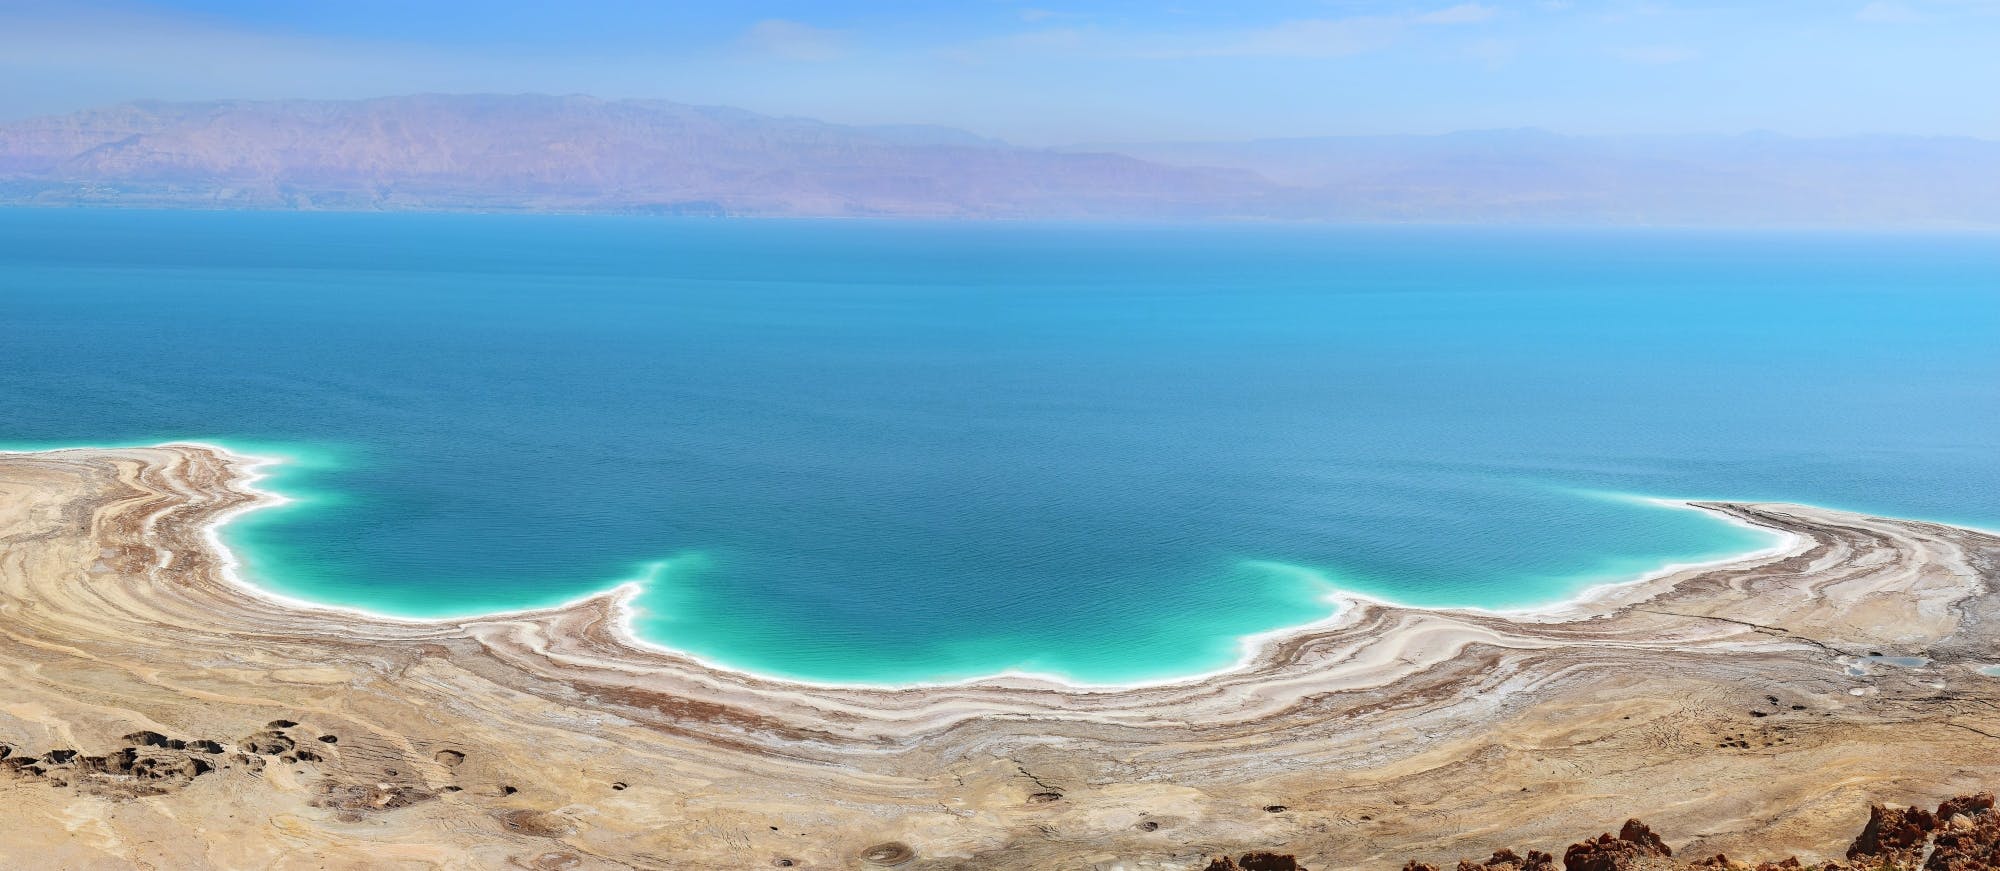 Dead Sea relaxation tour from Jerusalem